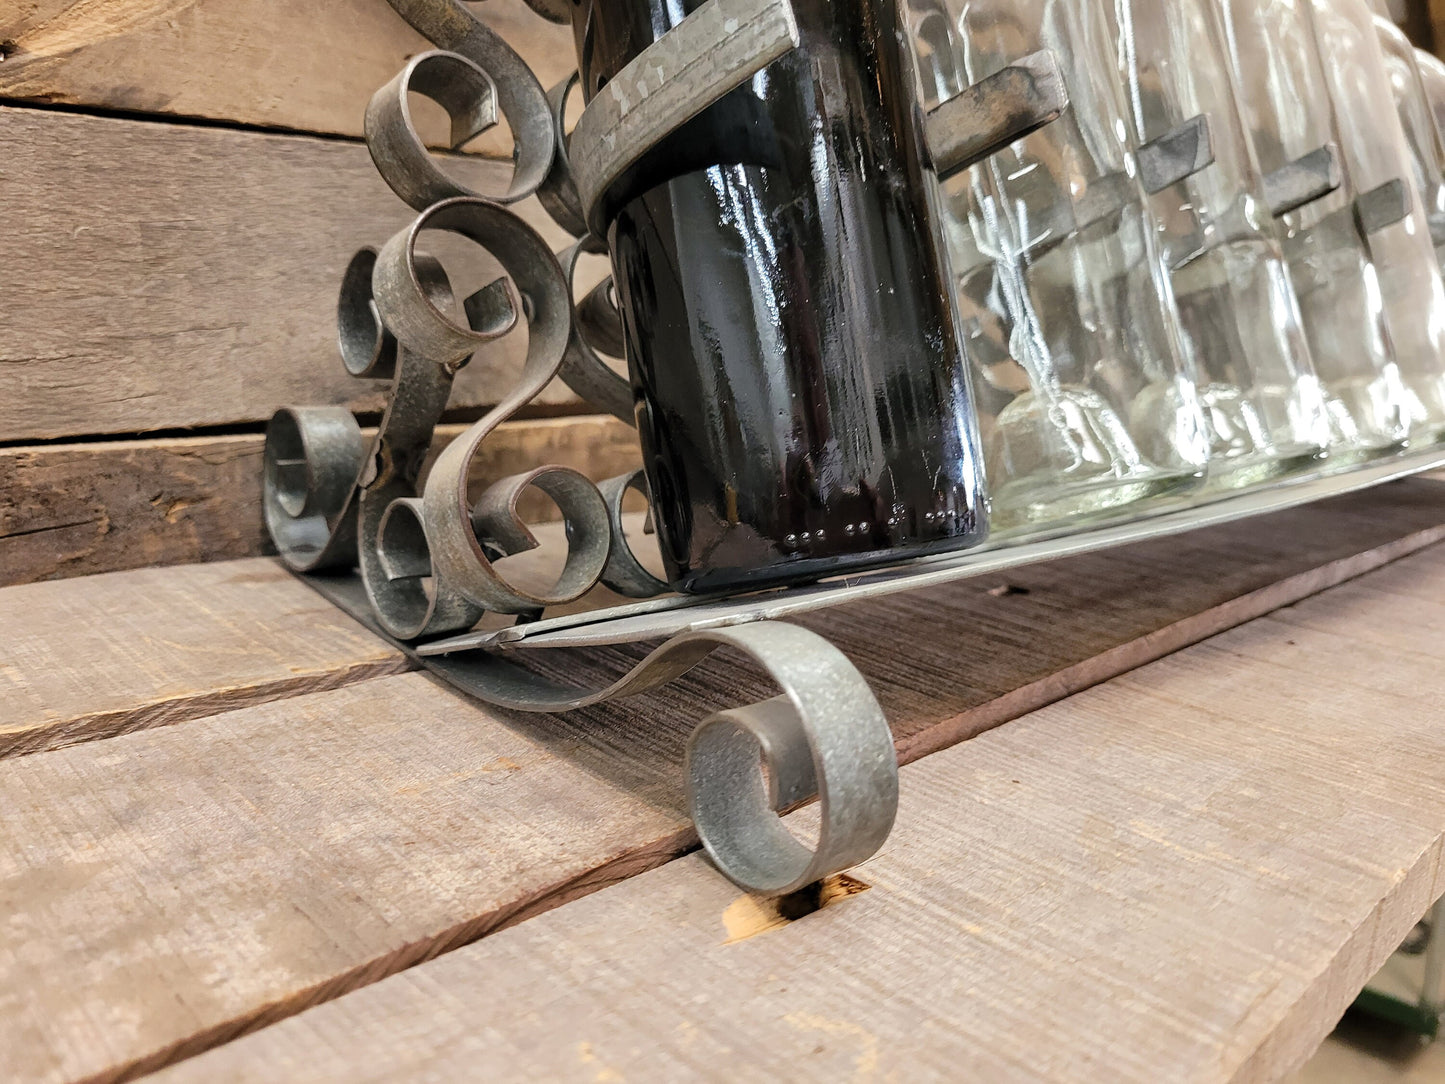 SALE! Counter Top Wine Bottle Holder - Heart Spirals - Made from local Napa California wine barrel rings. 100% Recycled!